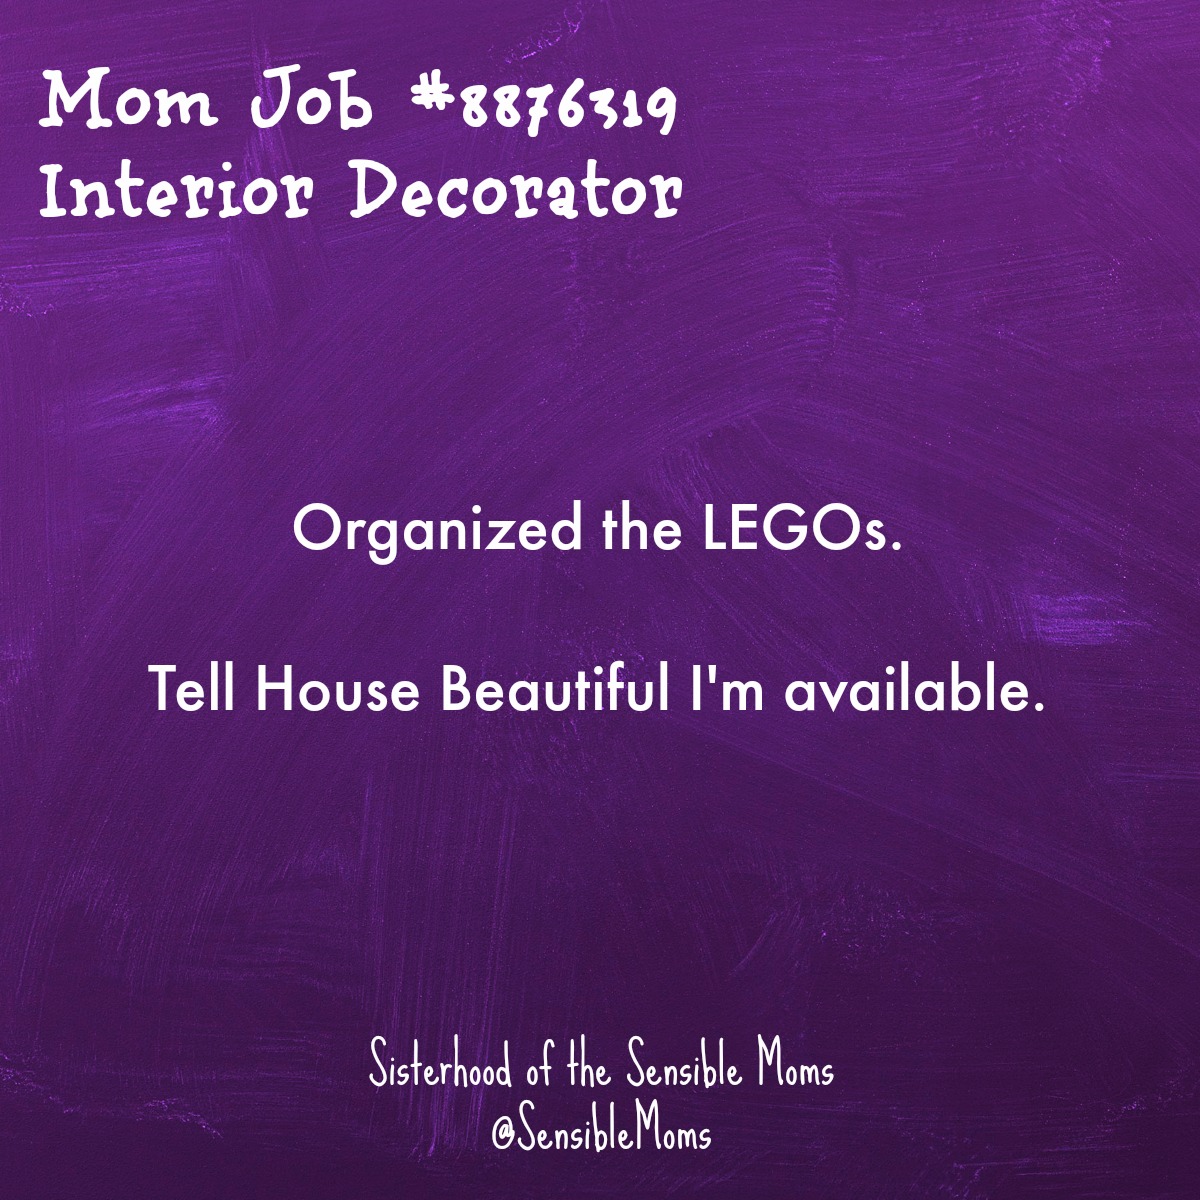 Being a mother means being a Jacqueline of All Trades . . . whether we want to be or not. But even if we can't get a little help, we can at least find the humor in these 13 Mom Jobs We All Can Relate To. | Sisterhood of the Sensible Moms